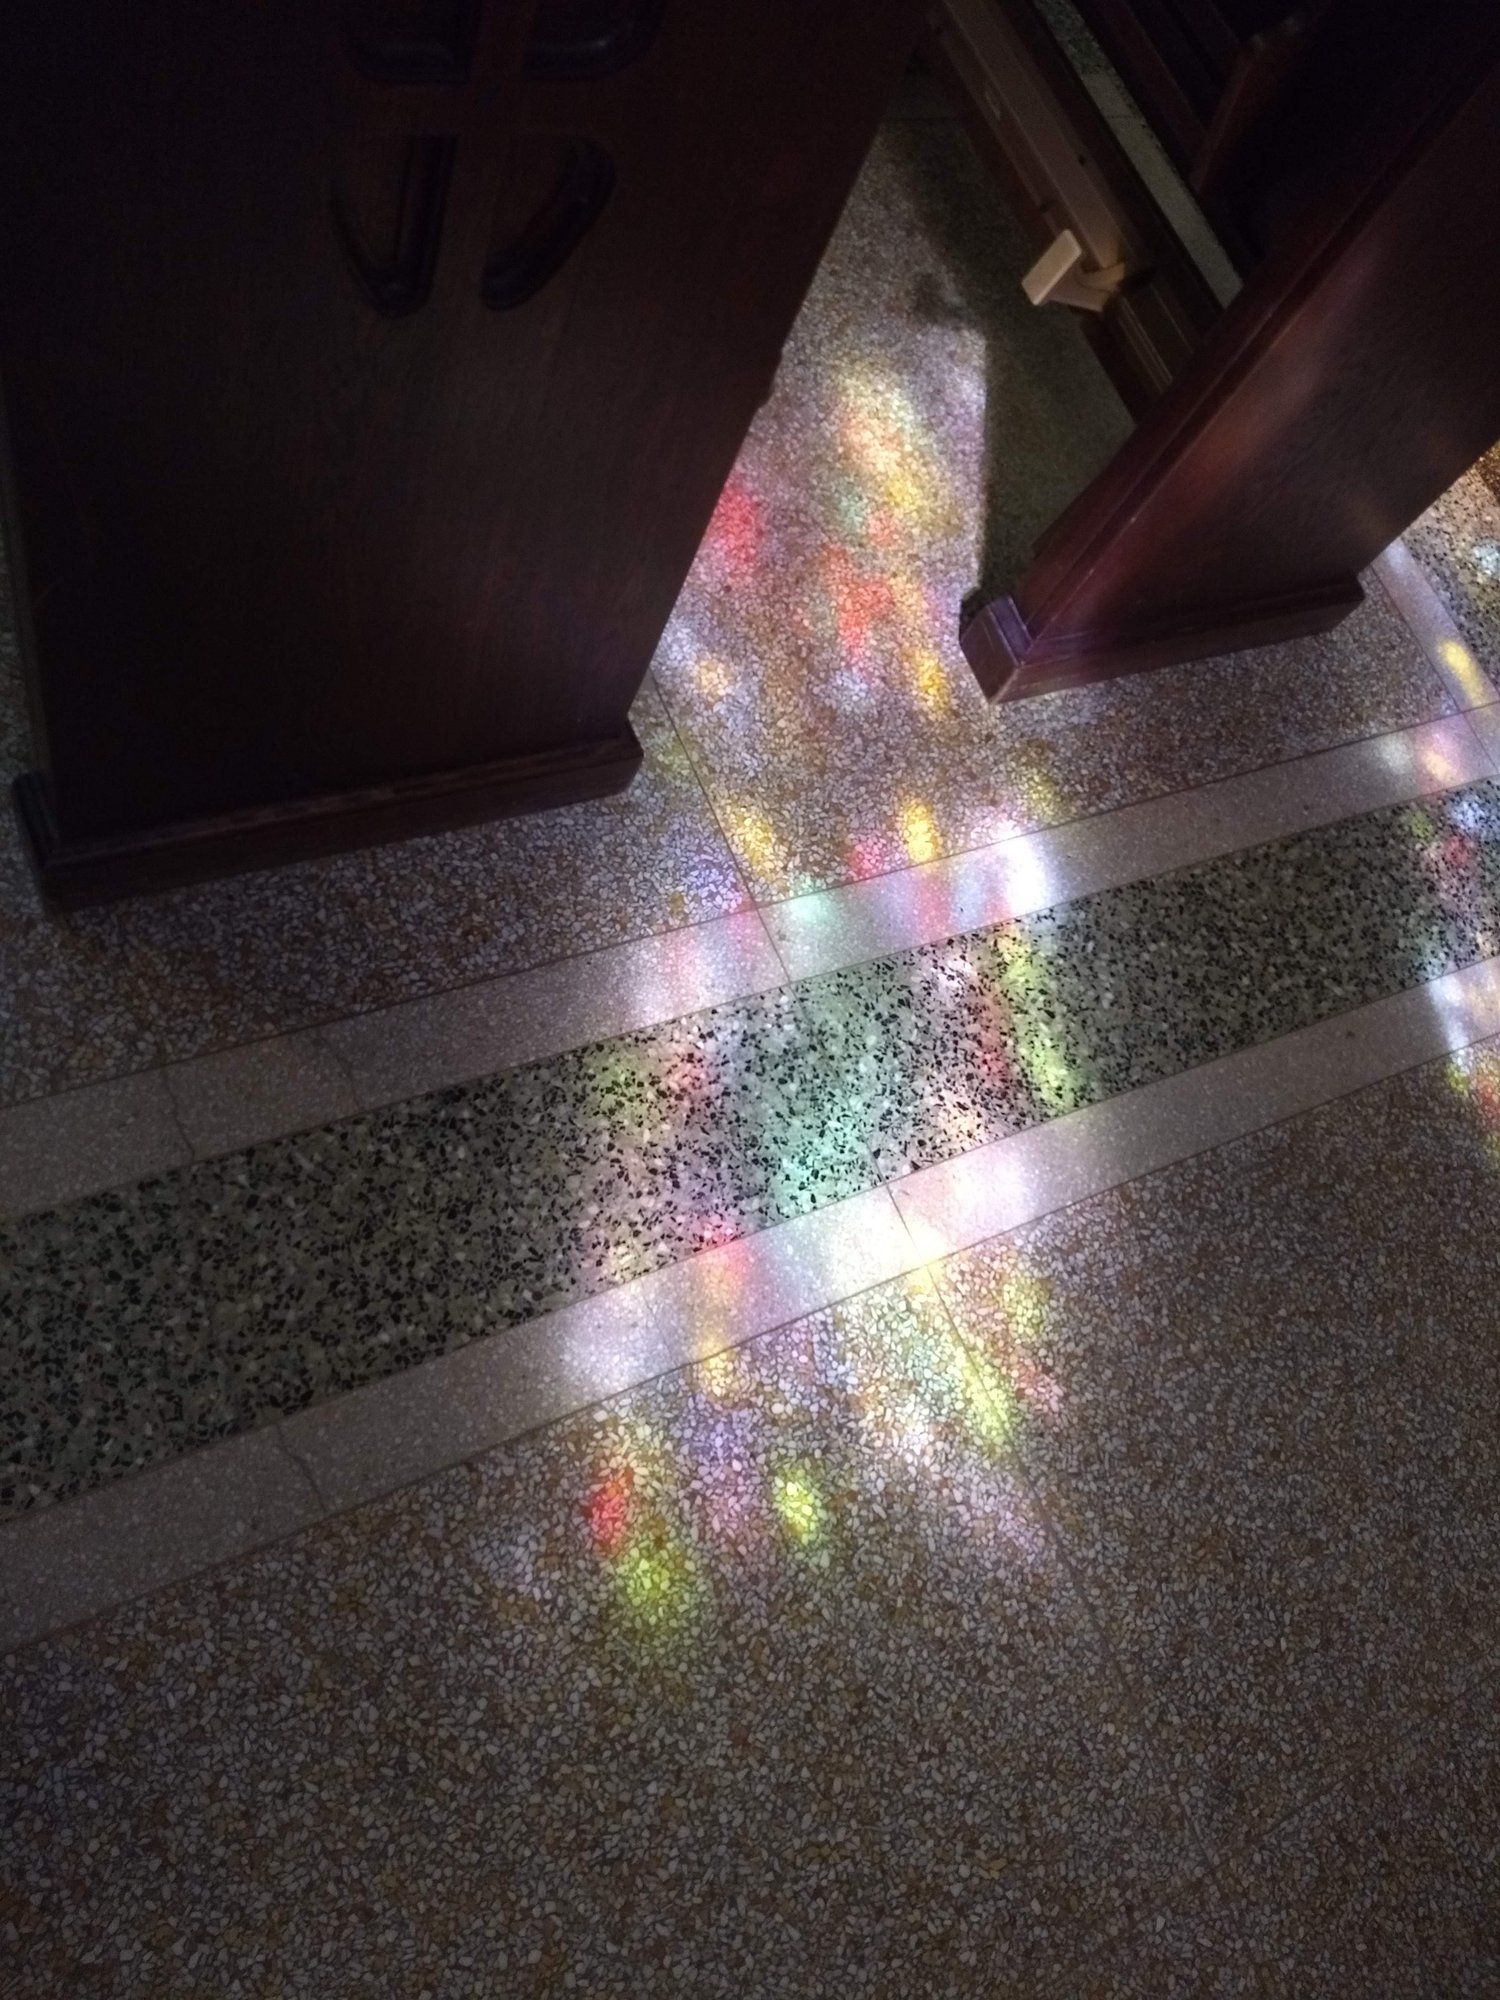 Sunlight Streaming through StainGlass windows and Reflecting off the Polished Church Floors